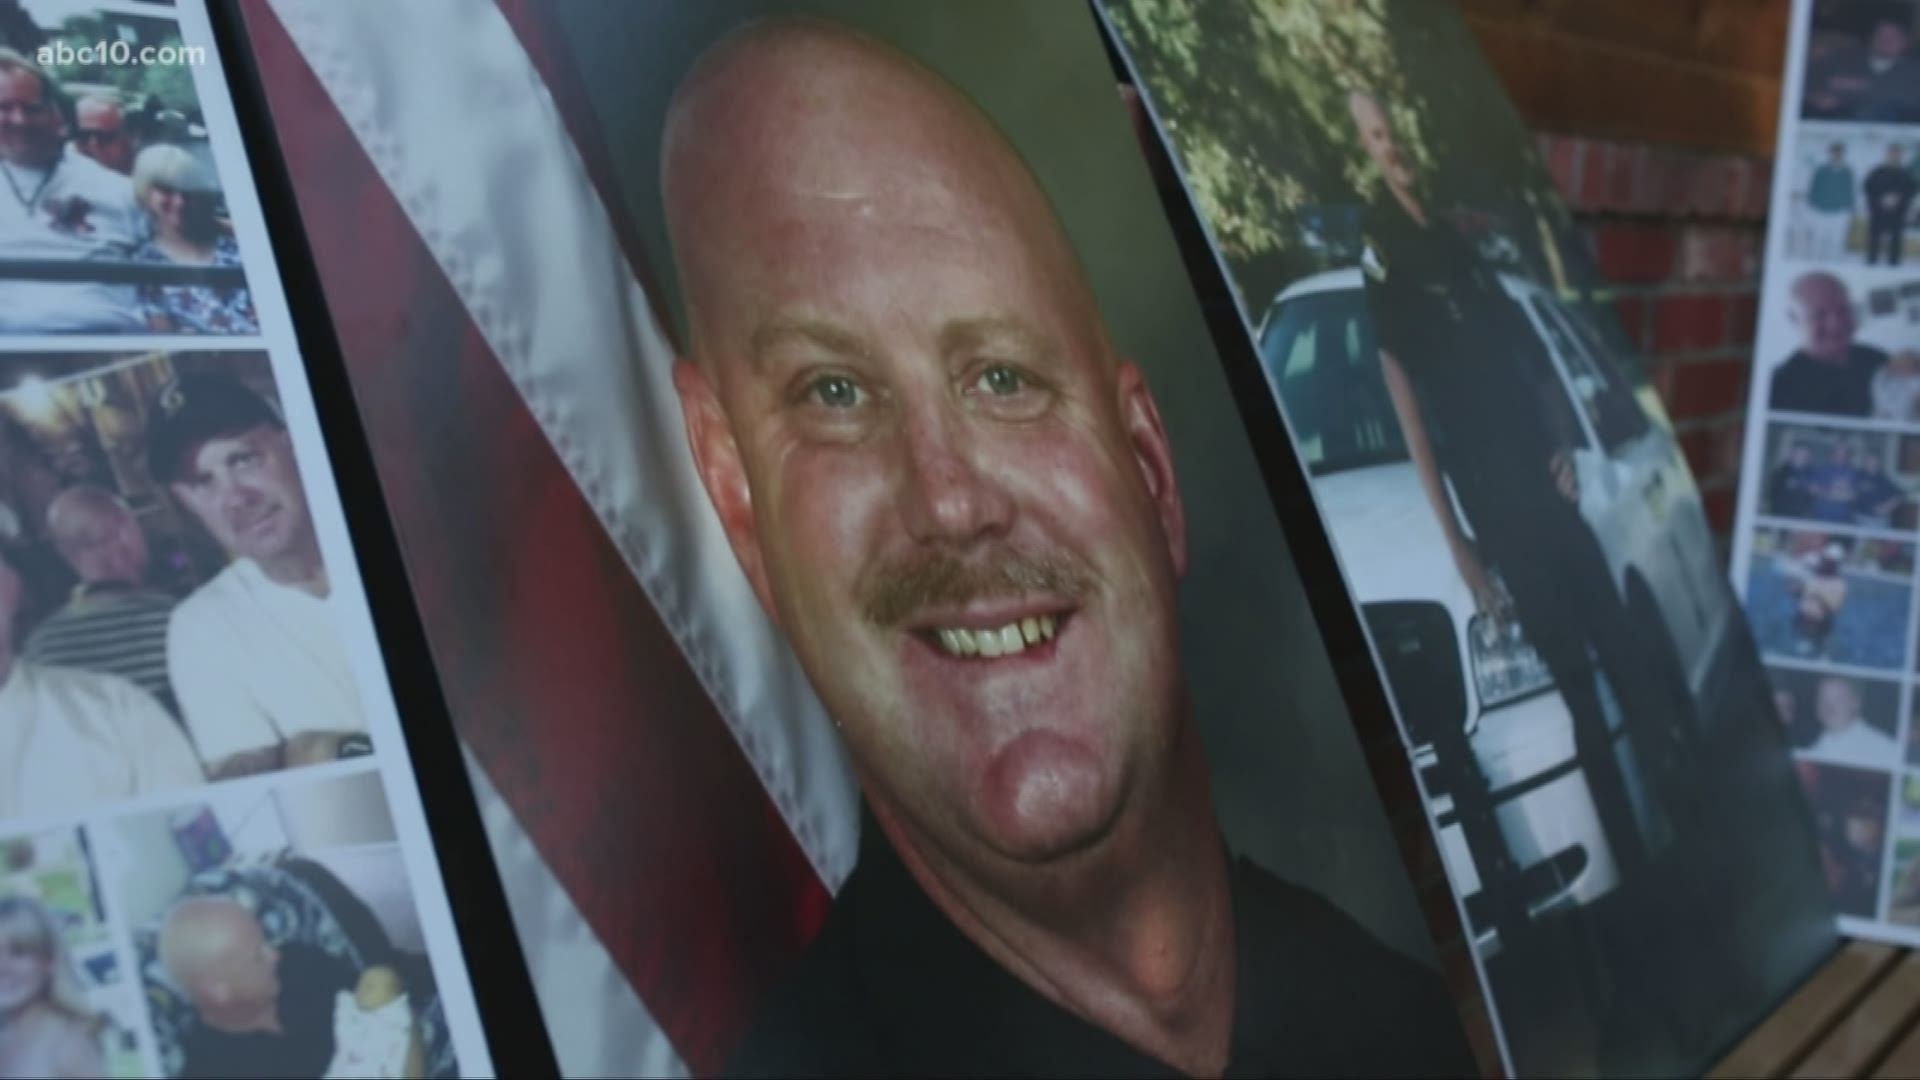 August 30 marks one year since Sacramento County deputy Robert French was shot and killed. There have been tributes and fundraisers, but on the anniversary of his death, family wants the public to know he was also a loving father and grandfather.